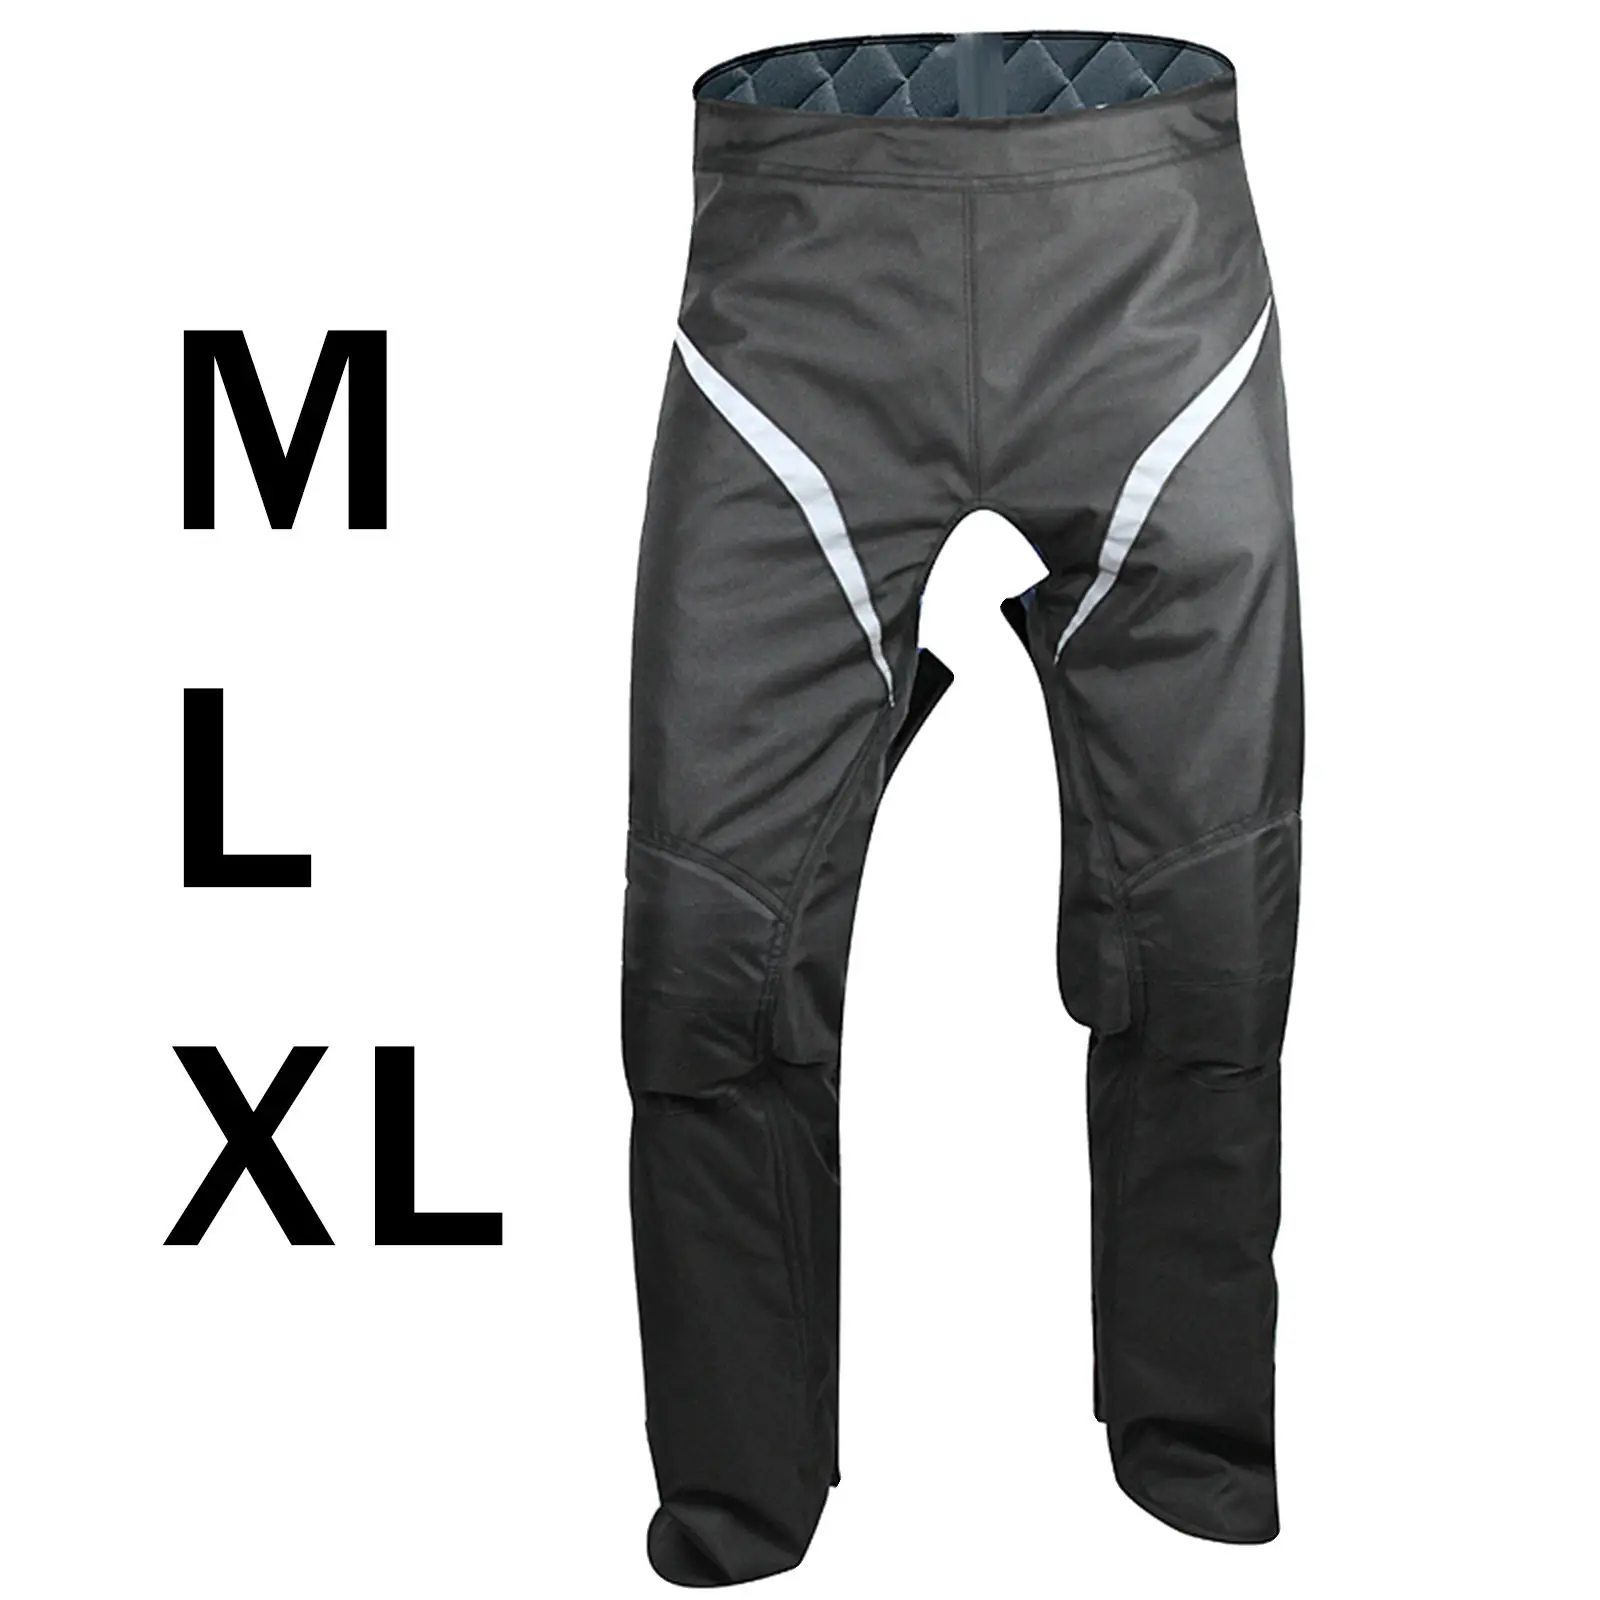 Motorcycle Pants Windproof Adjustable Warmth Leggings Offroad Overpants for Touring Skiing Hiking in Cold Seasons